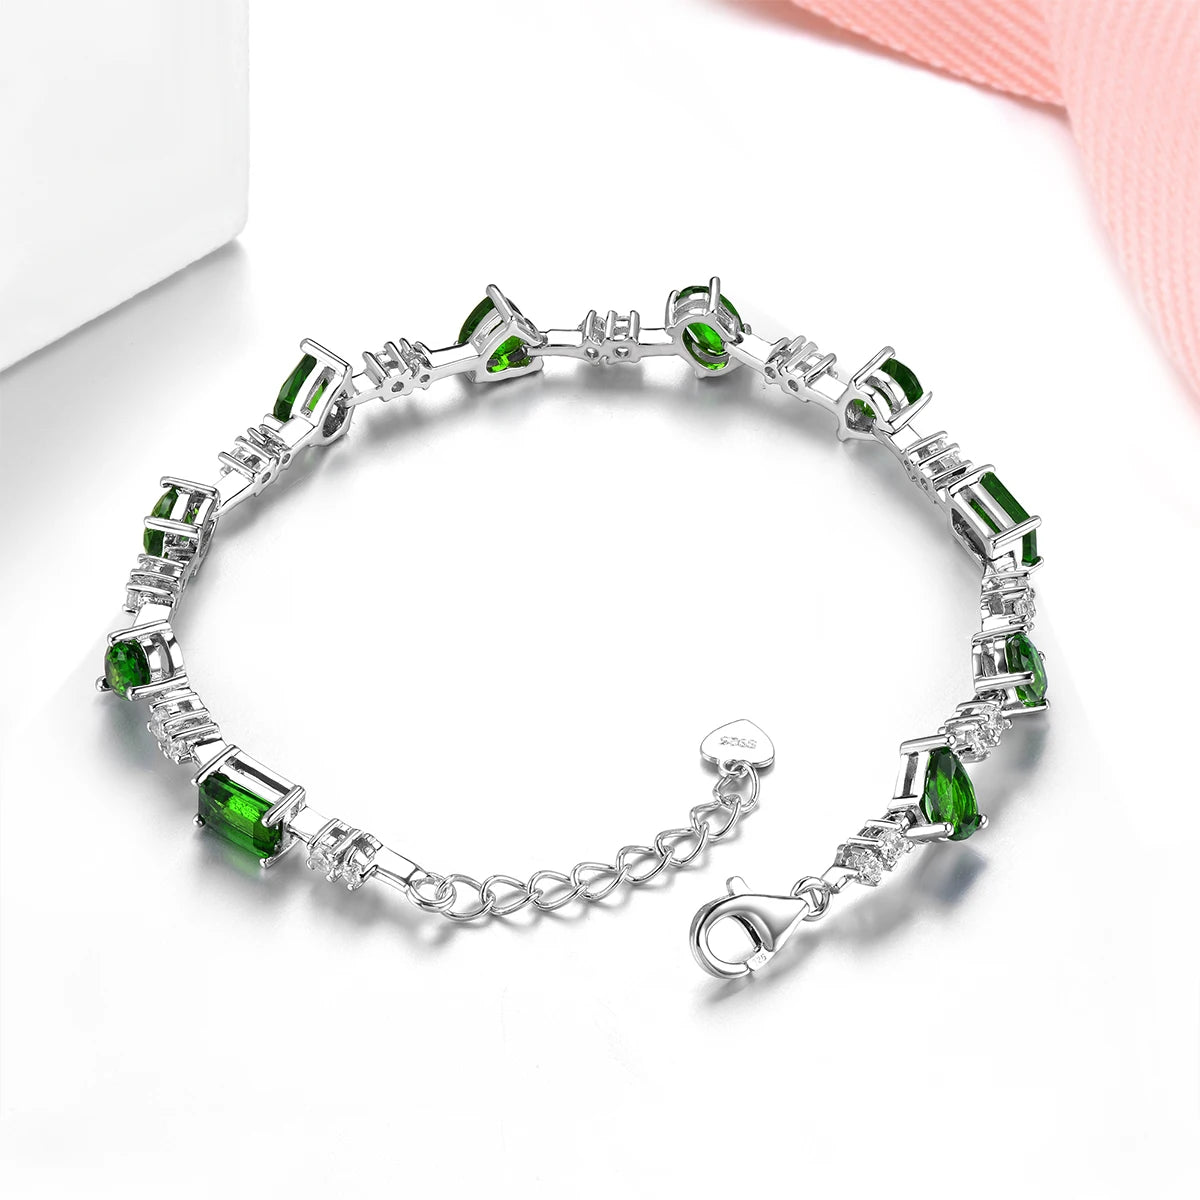 Natural Chrome Diopside Sterling Silver Bracelet 5.2 Carats Genuine Gemstone Women Classic Simple Design S925 Jewelrys Gifts